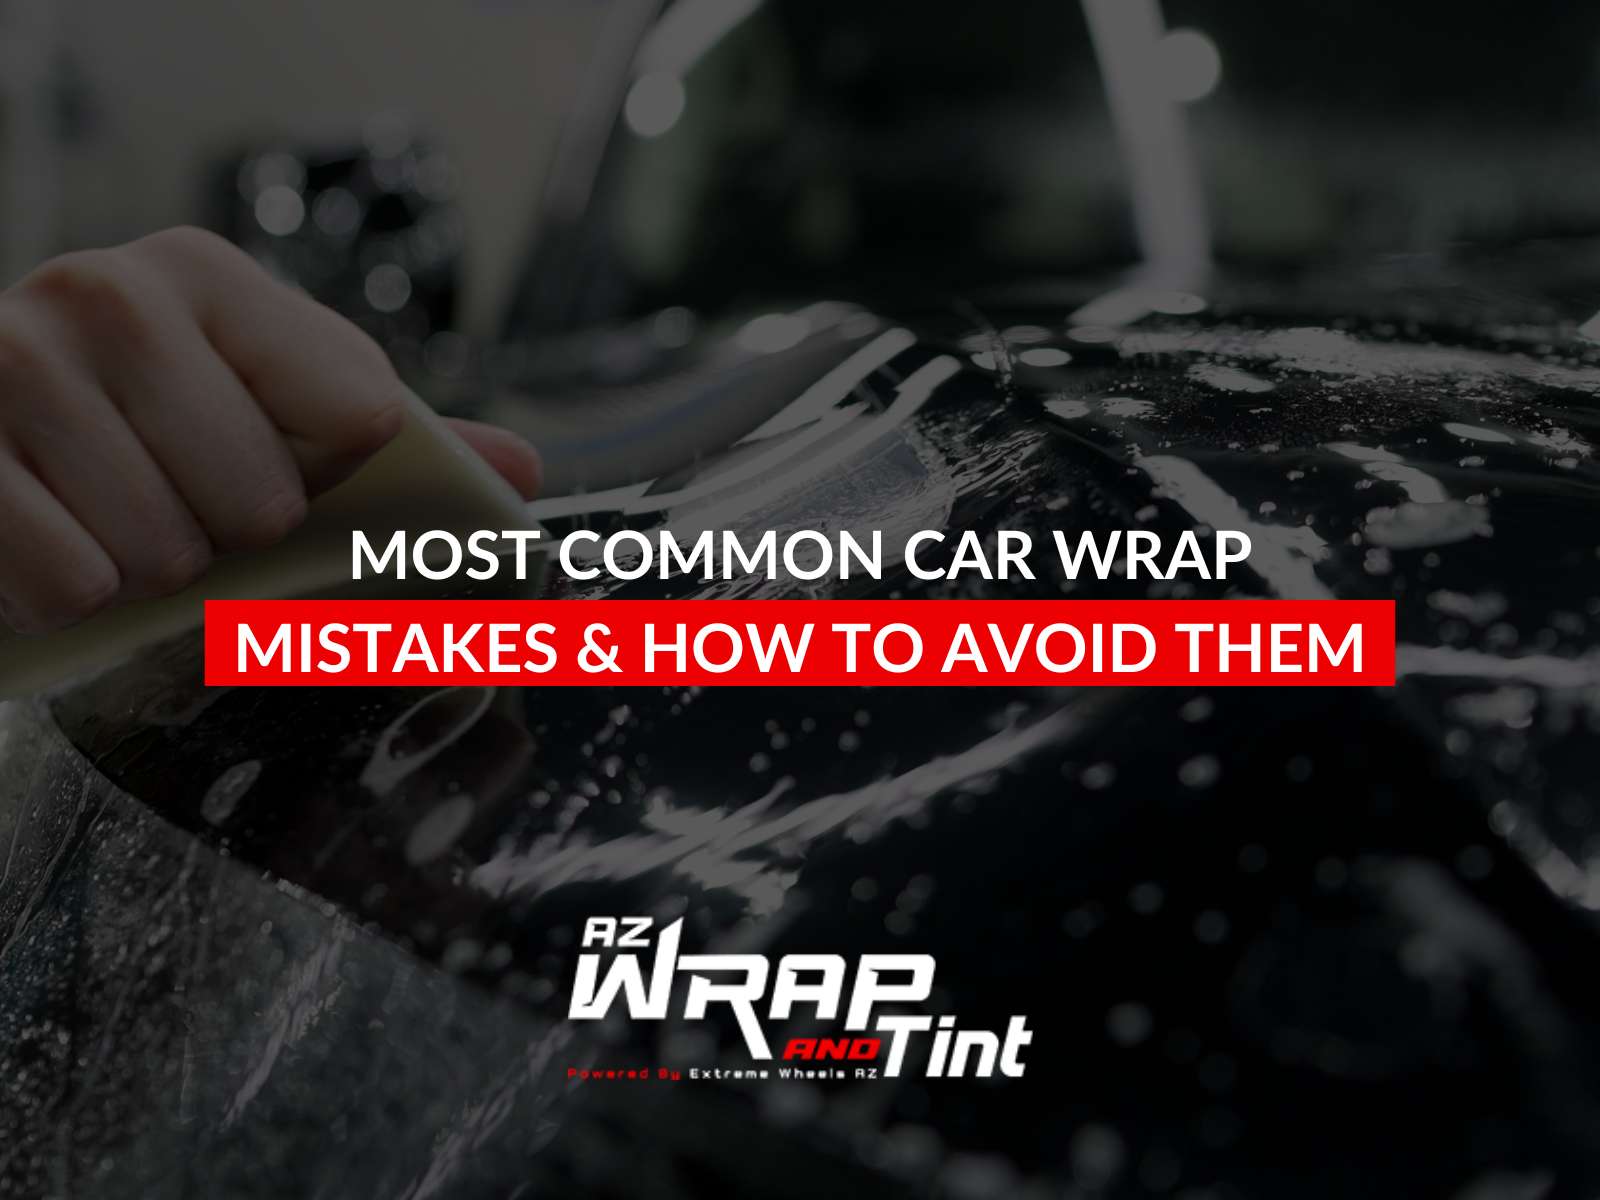 Most Common Car Wrap Mistakes & How To Avoid Them